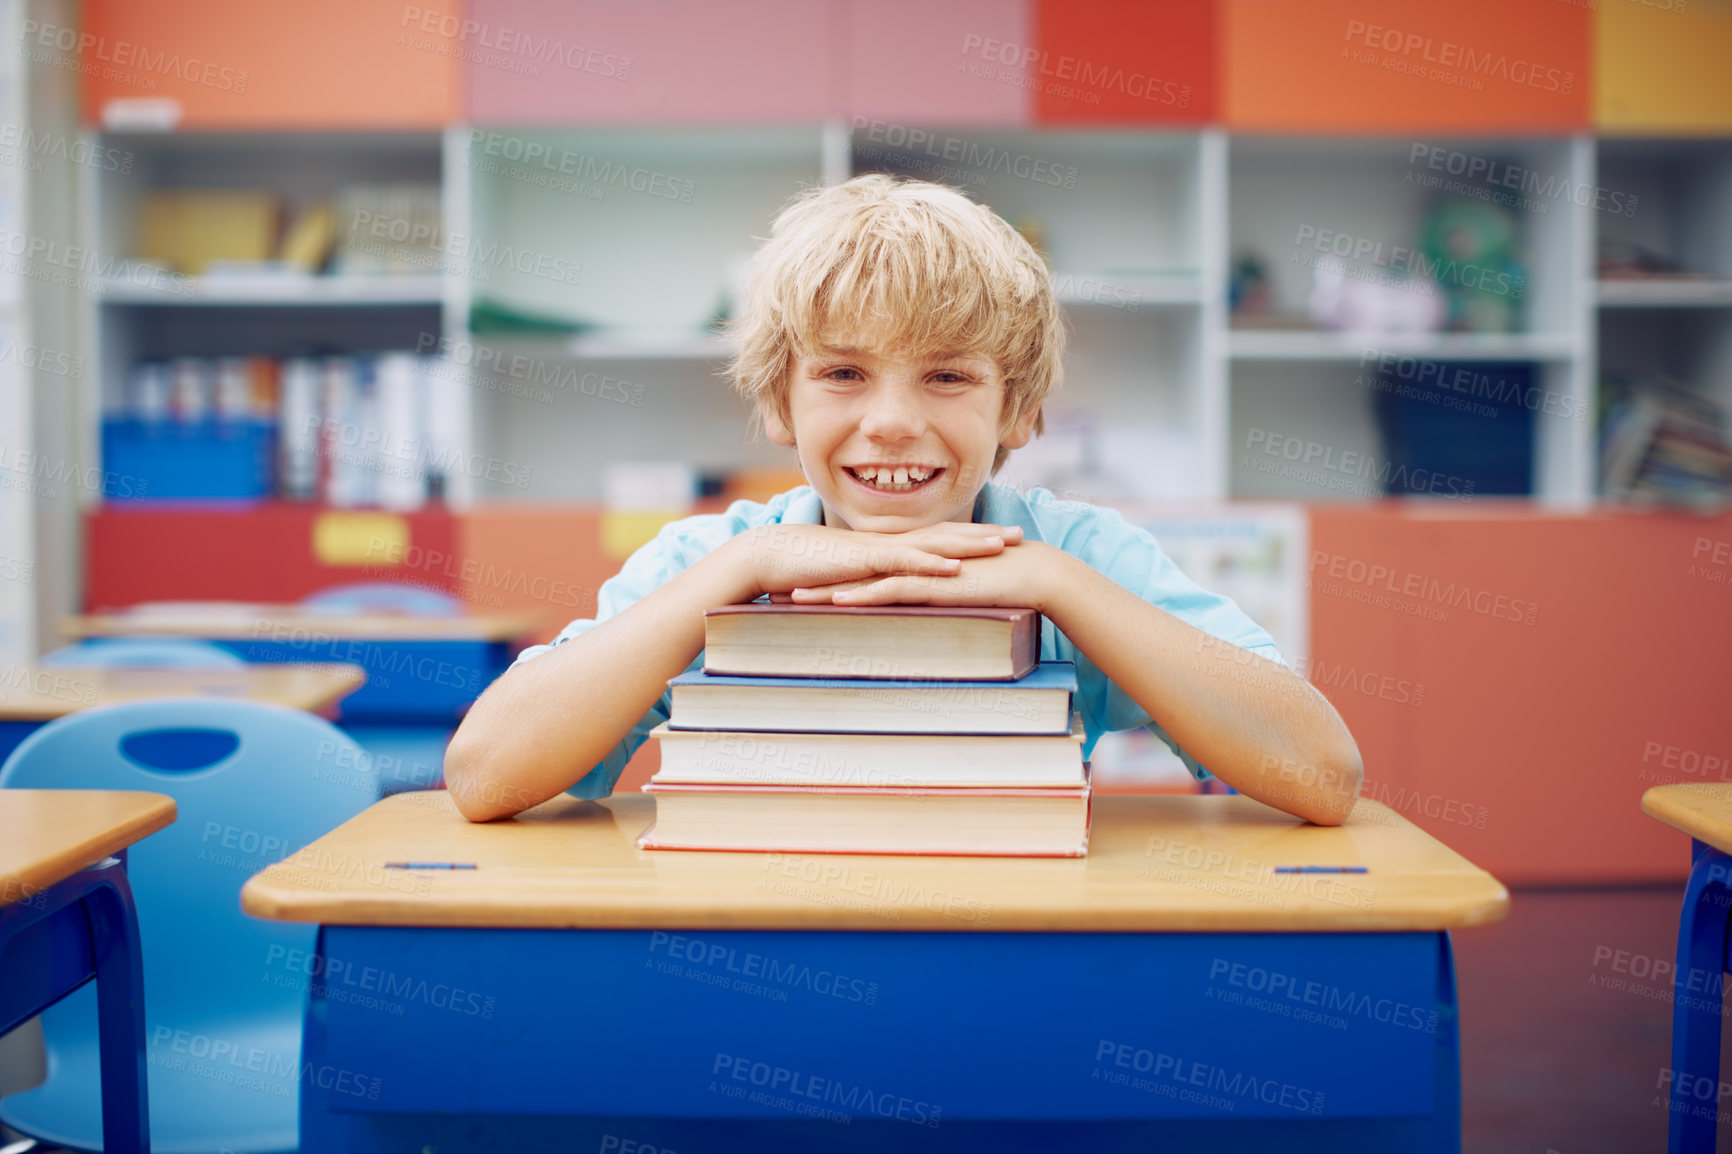 Buy stock photo A happy young boy sitting at his desk and leaning his chin on a stack of books